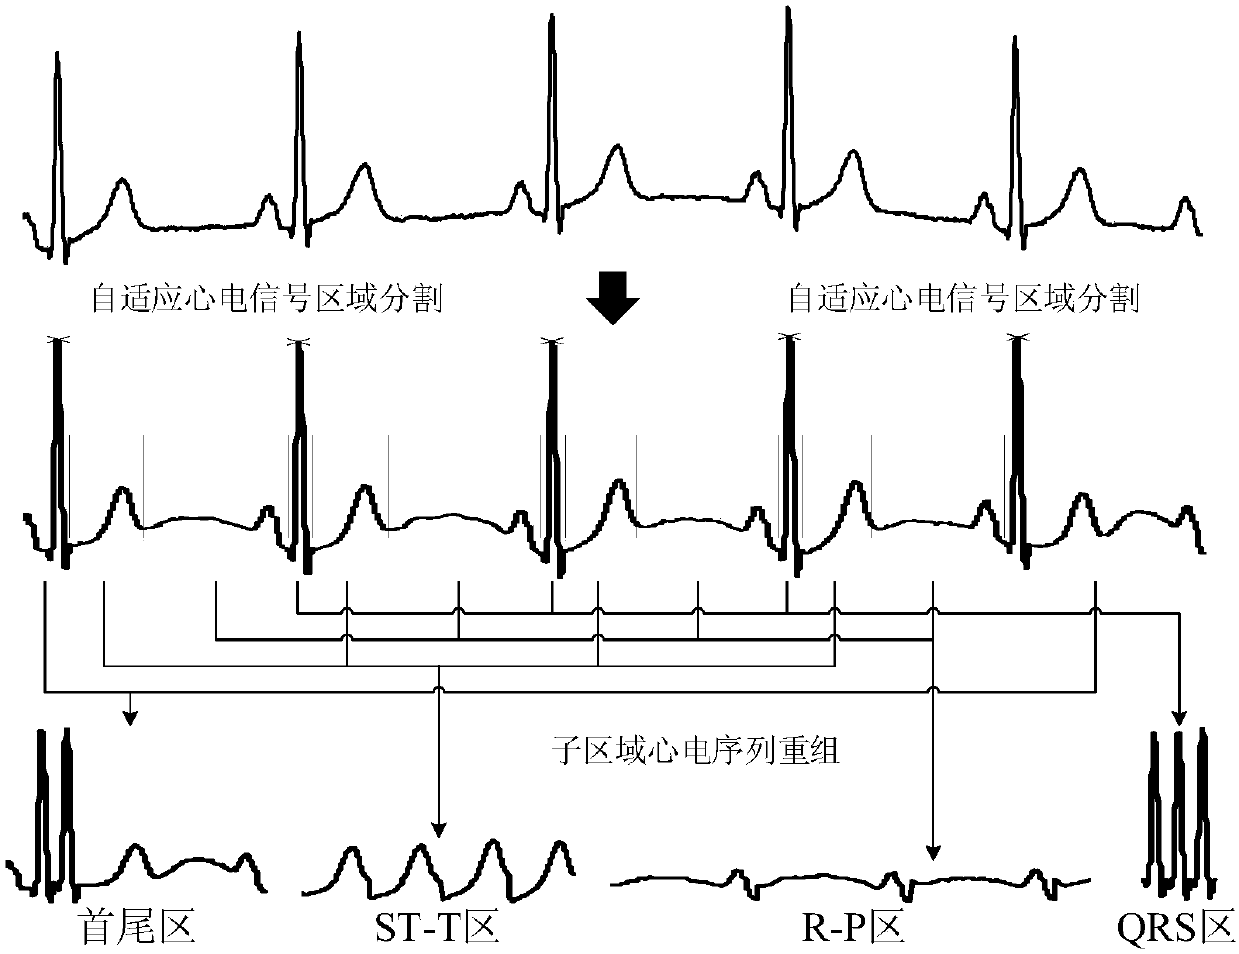 Linear reconstruction method of standard number 12 lead electrocardiogram segments based on self-adaptive electrocardiosignal region segmentation